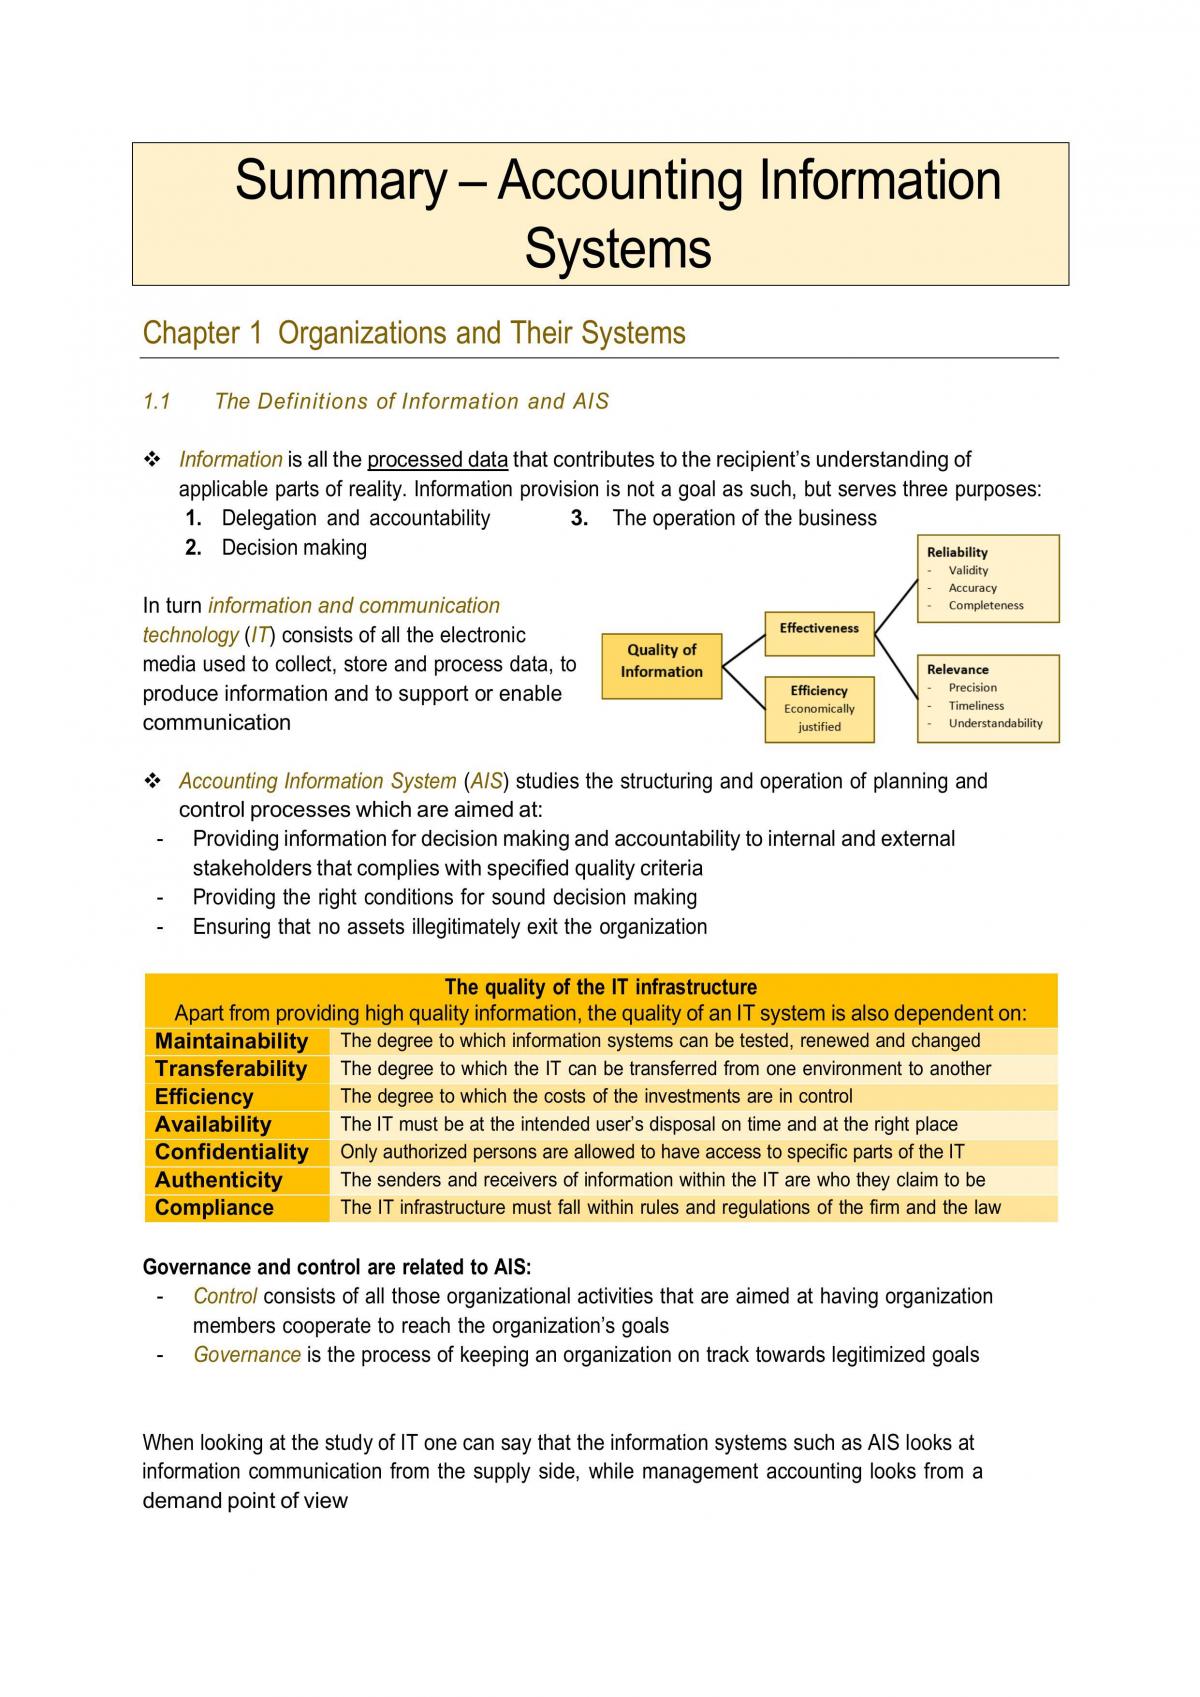 Accounting Information Systems - Summary - Page 1